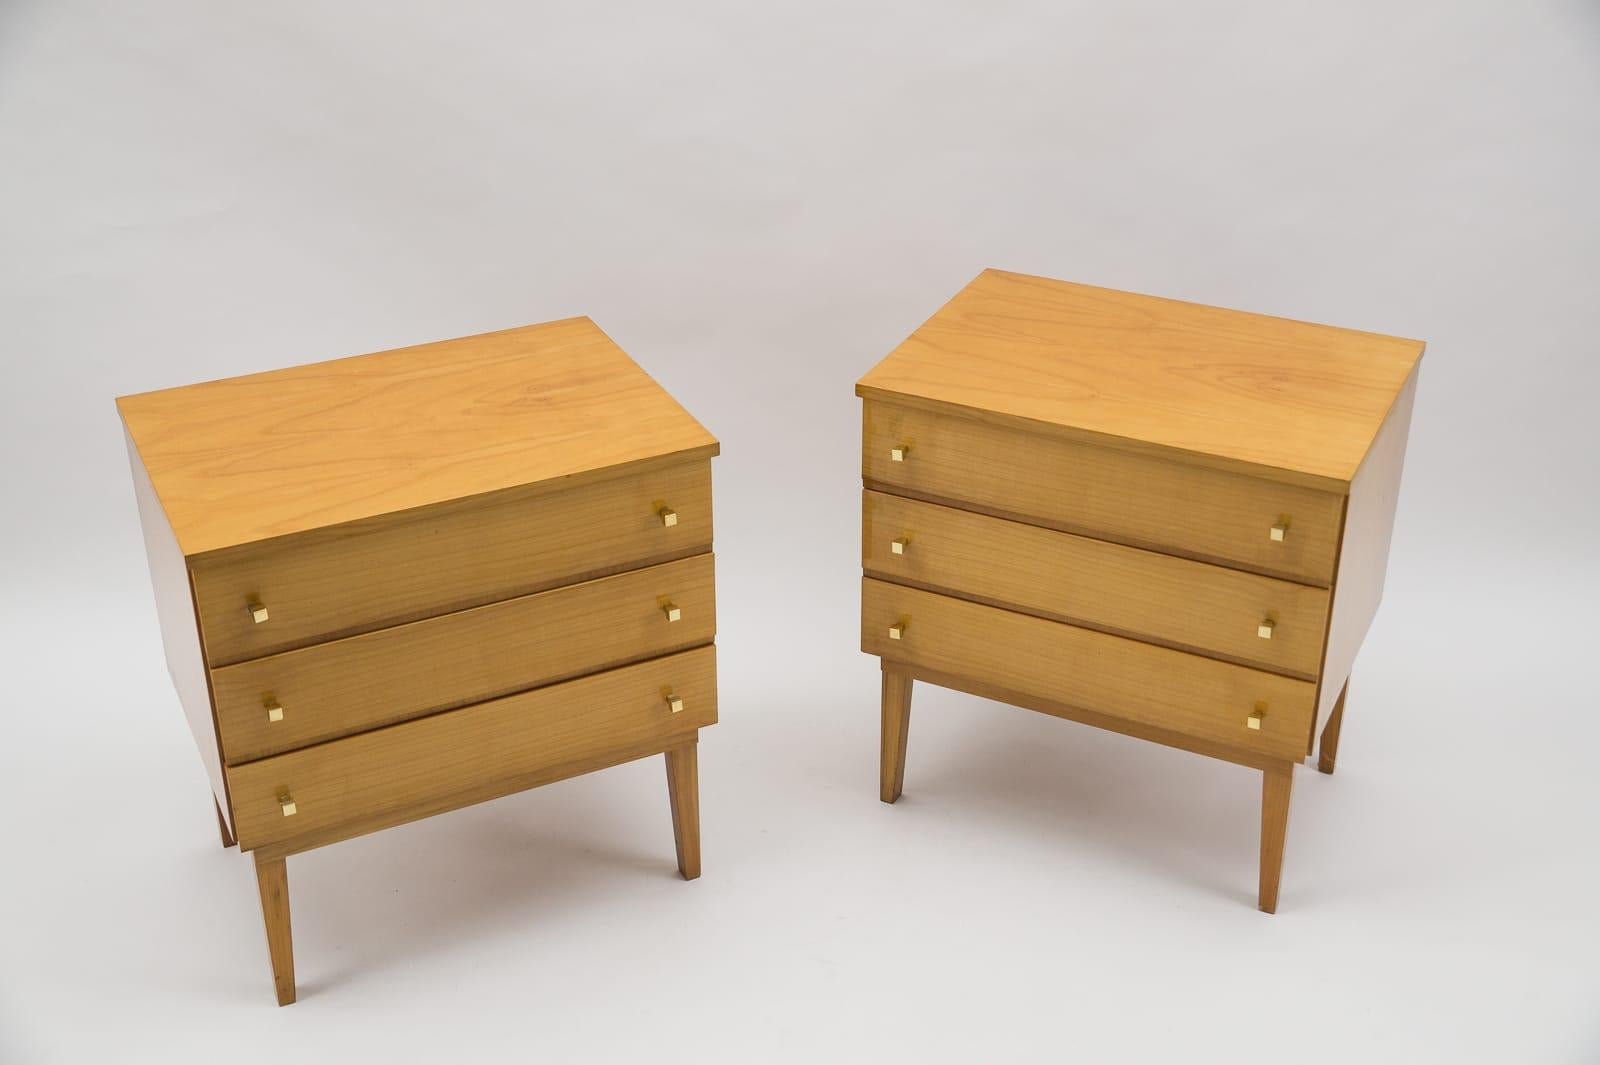  Mid-Century Modern Brass and Wood Nightstands, 1950s, Set of 2 For Sale 4